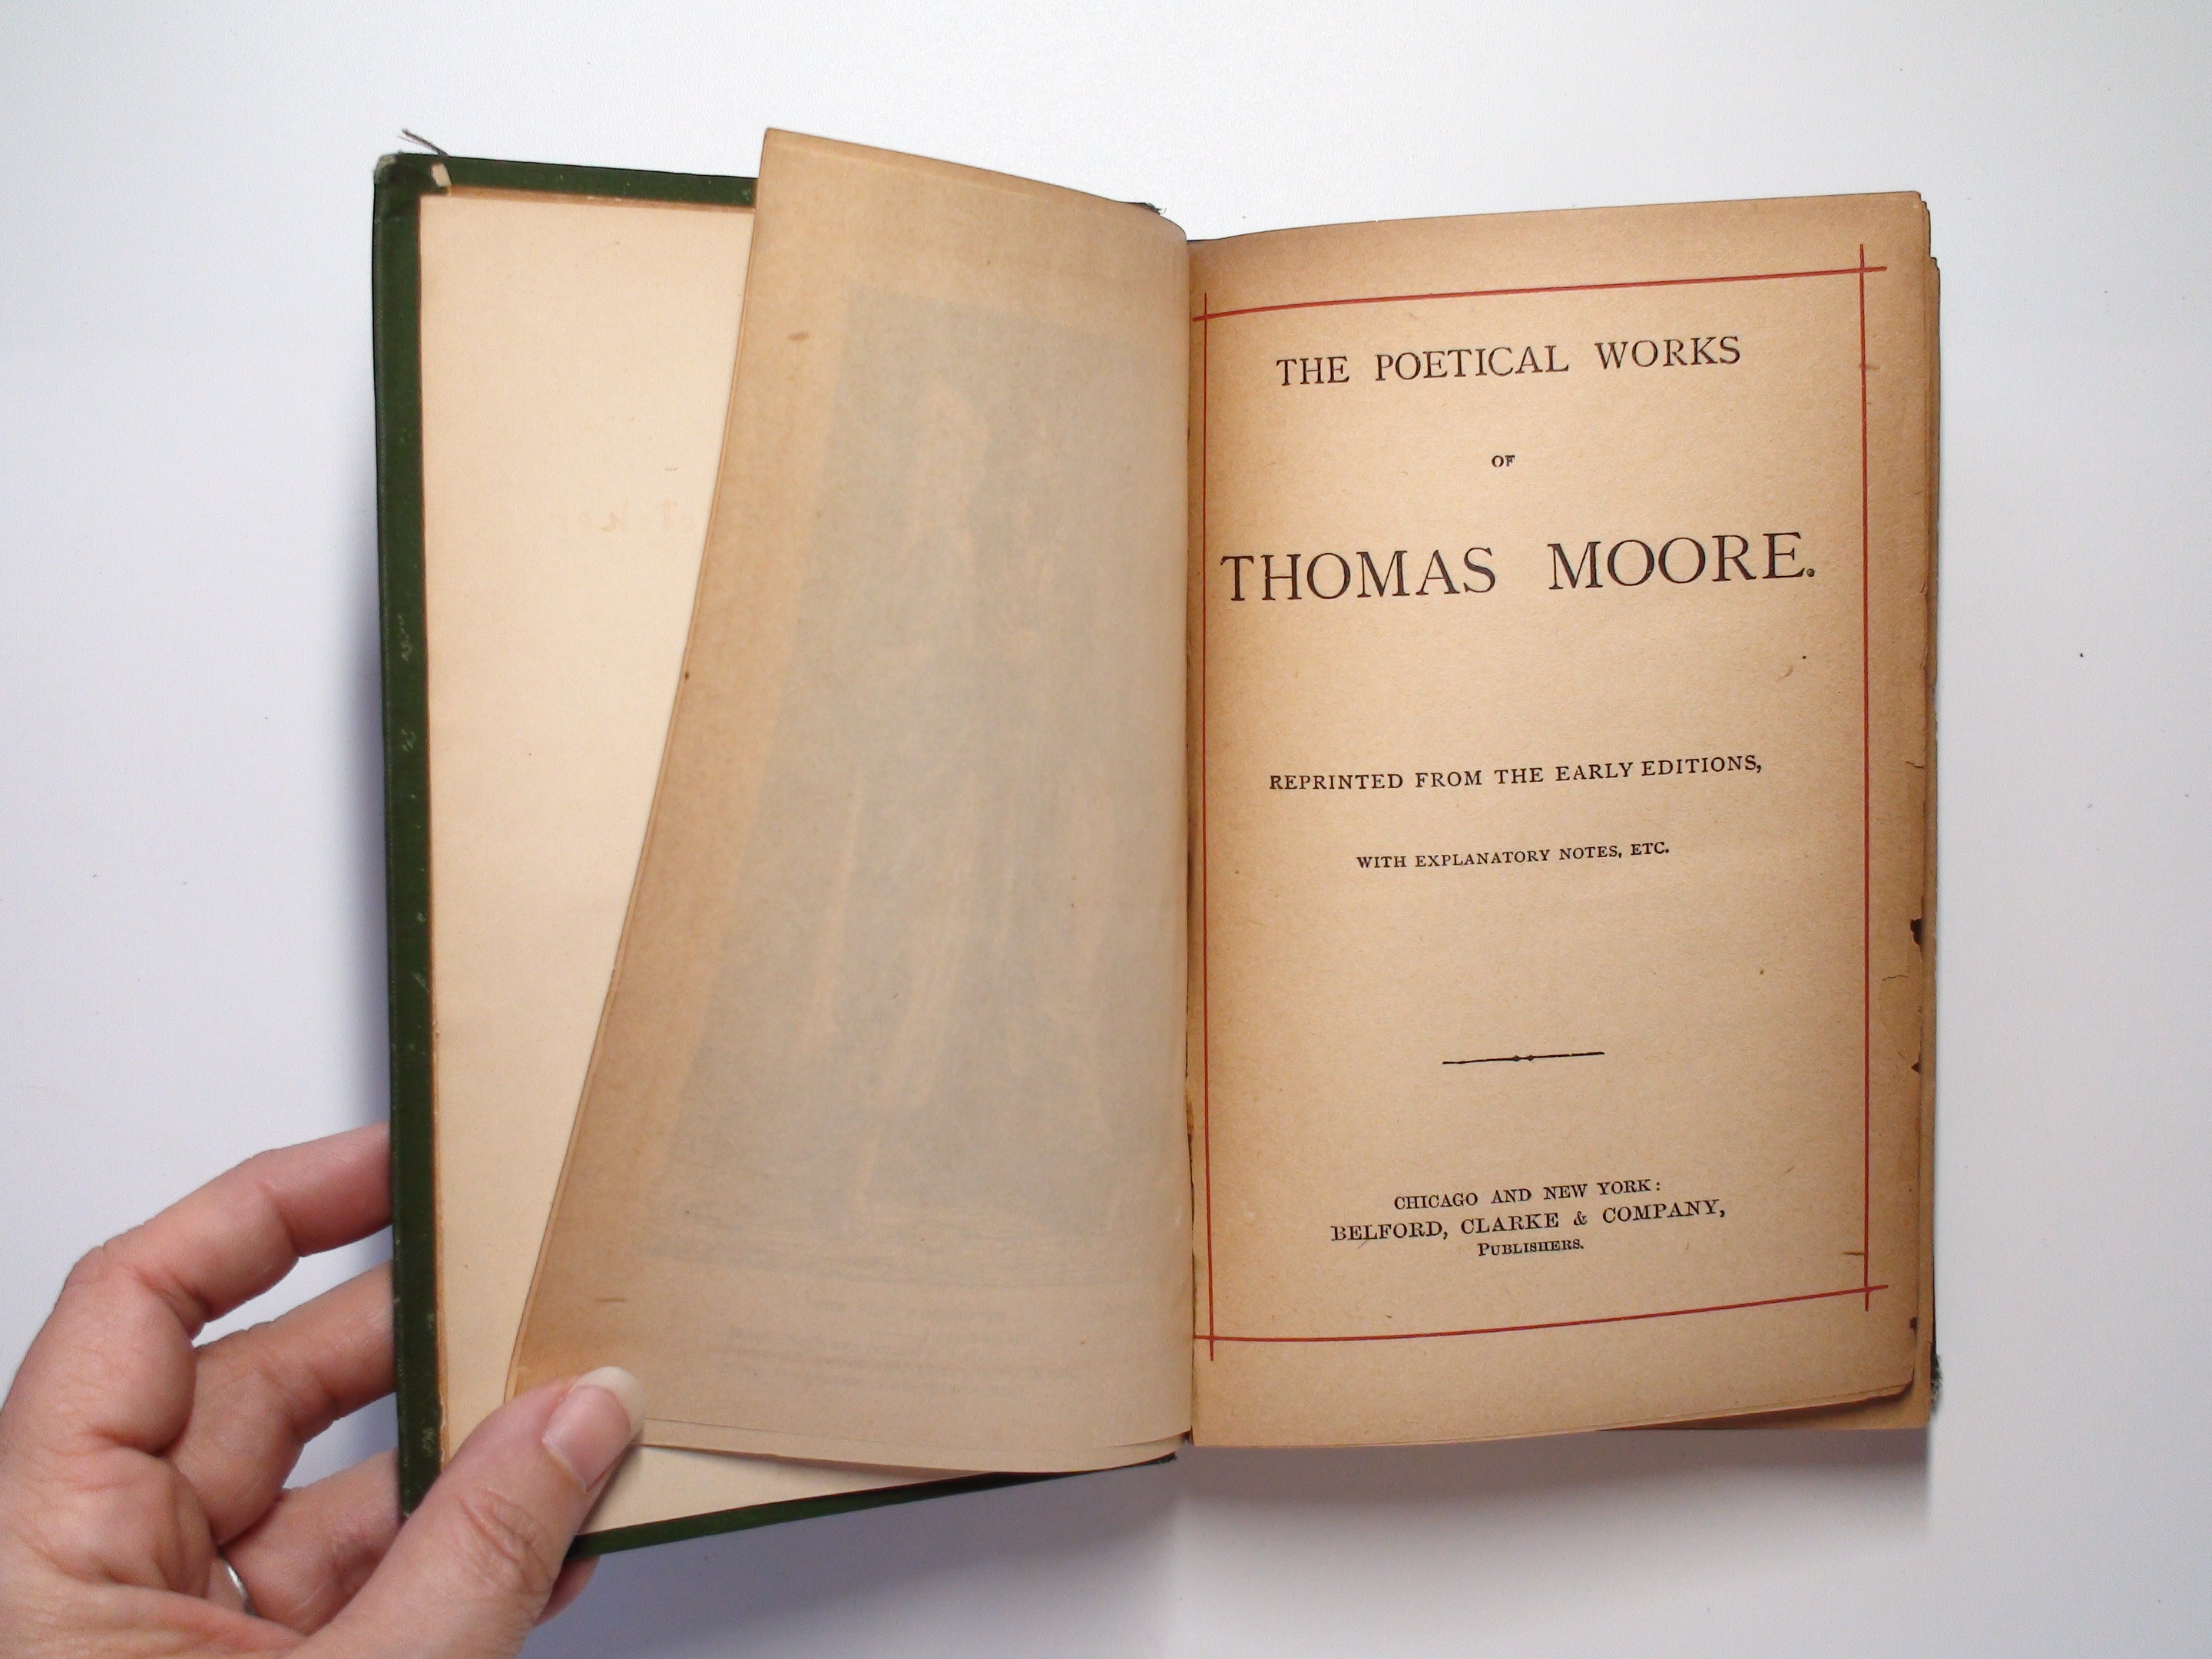 The Poetical Works of Thomas Moore, Beautifully Illustrated, 1888